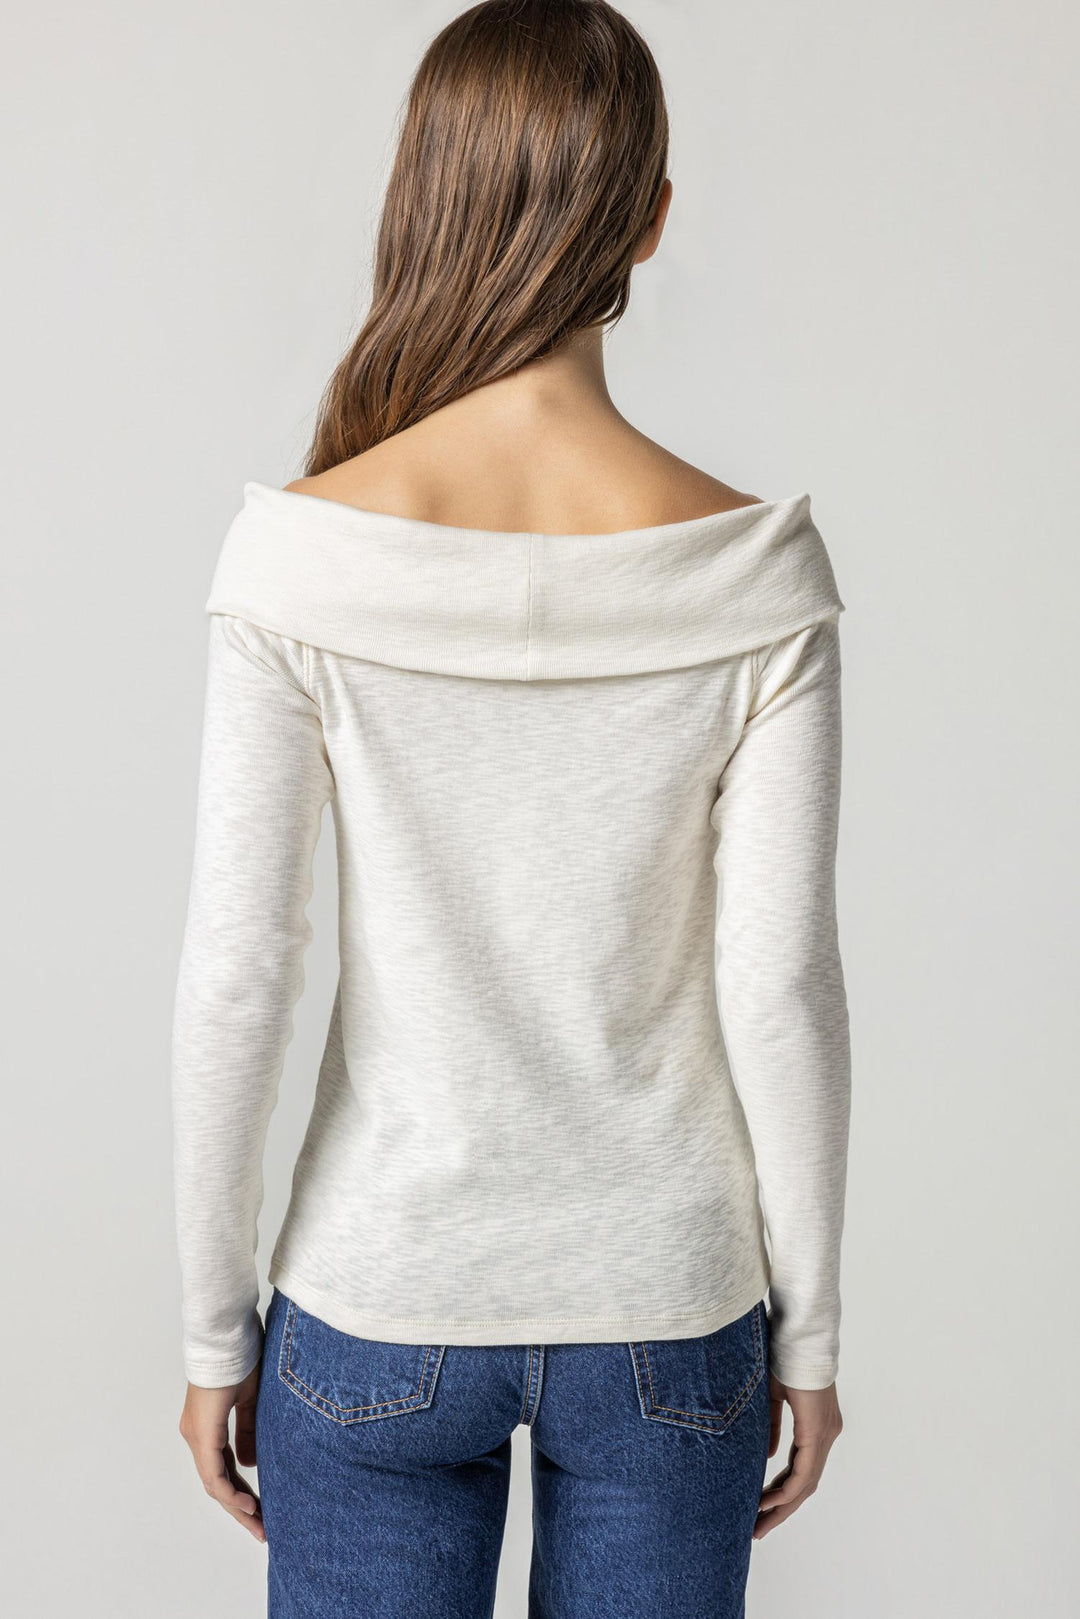 Long Sleeve Off the Shoulder Top in Winter White - Madison's Niche 